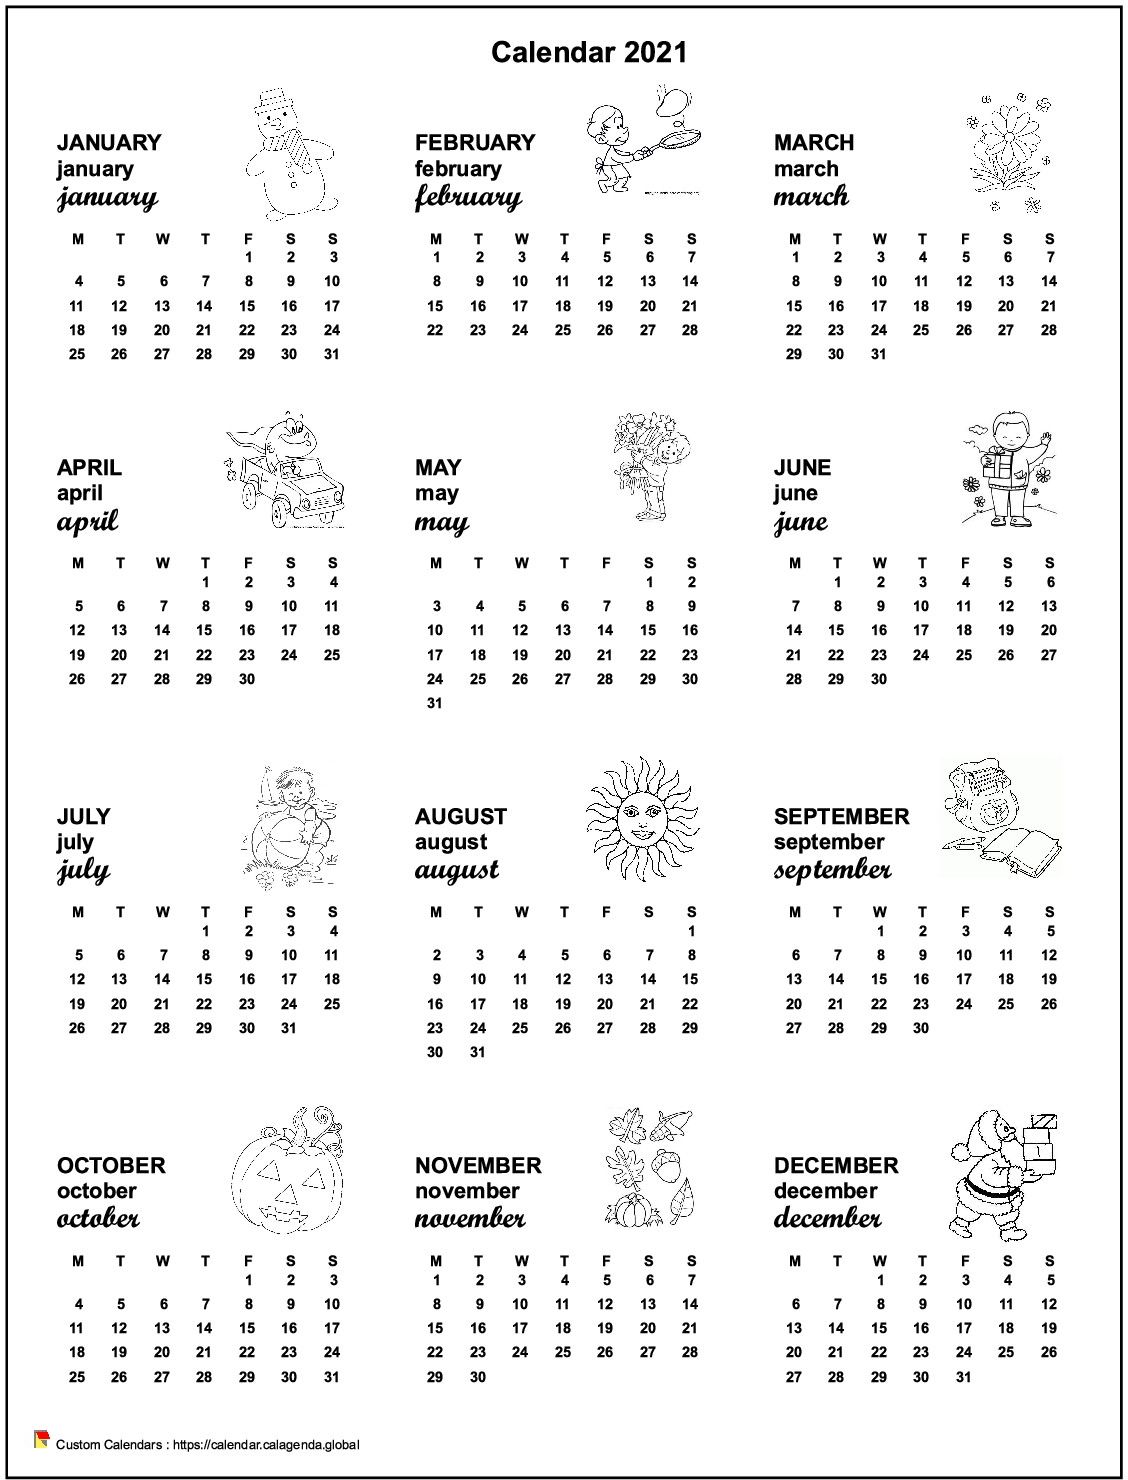 Calendar 2021 annual maternal and primary school